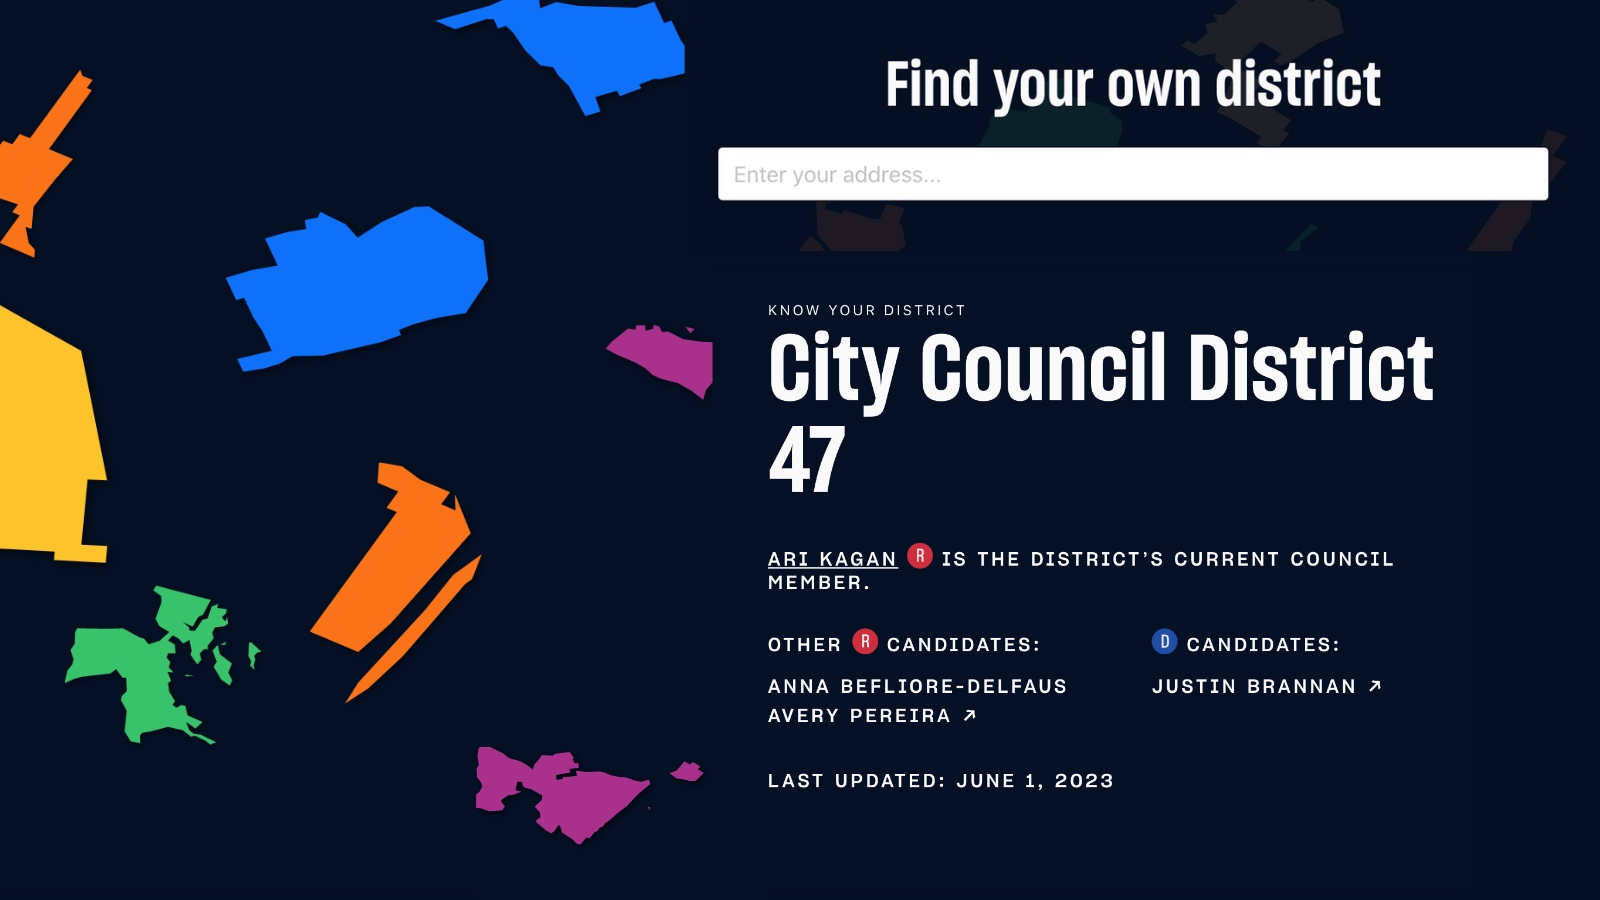 New York City Council District 20 The City